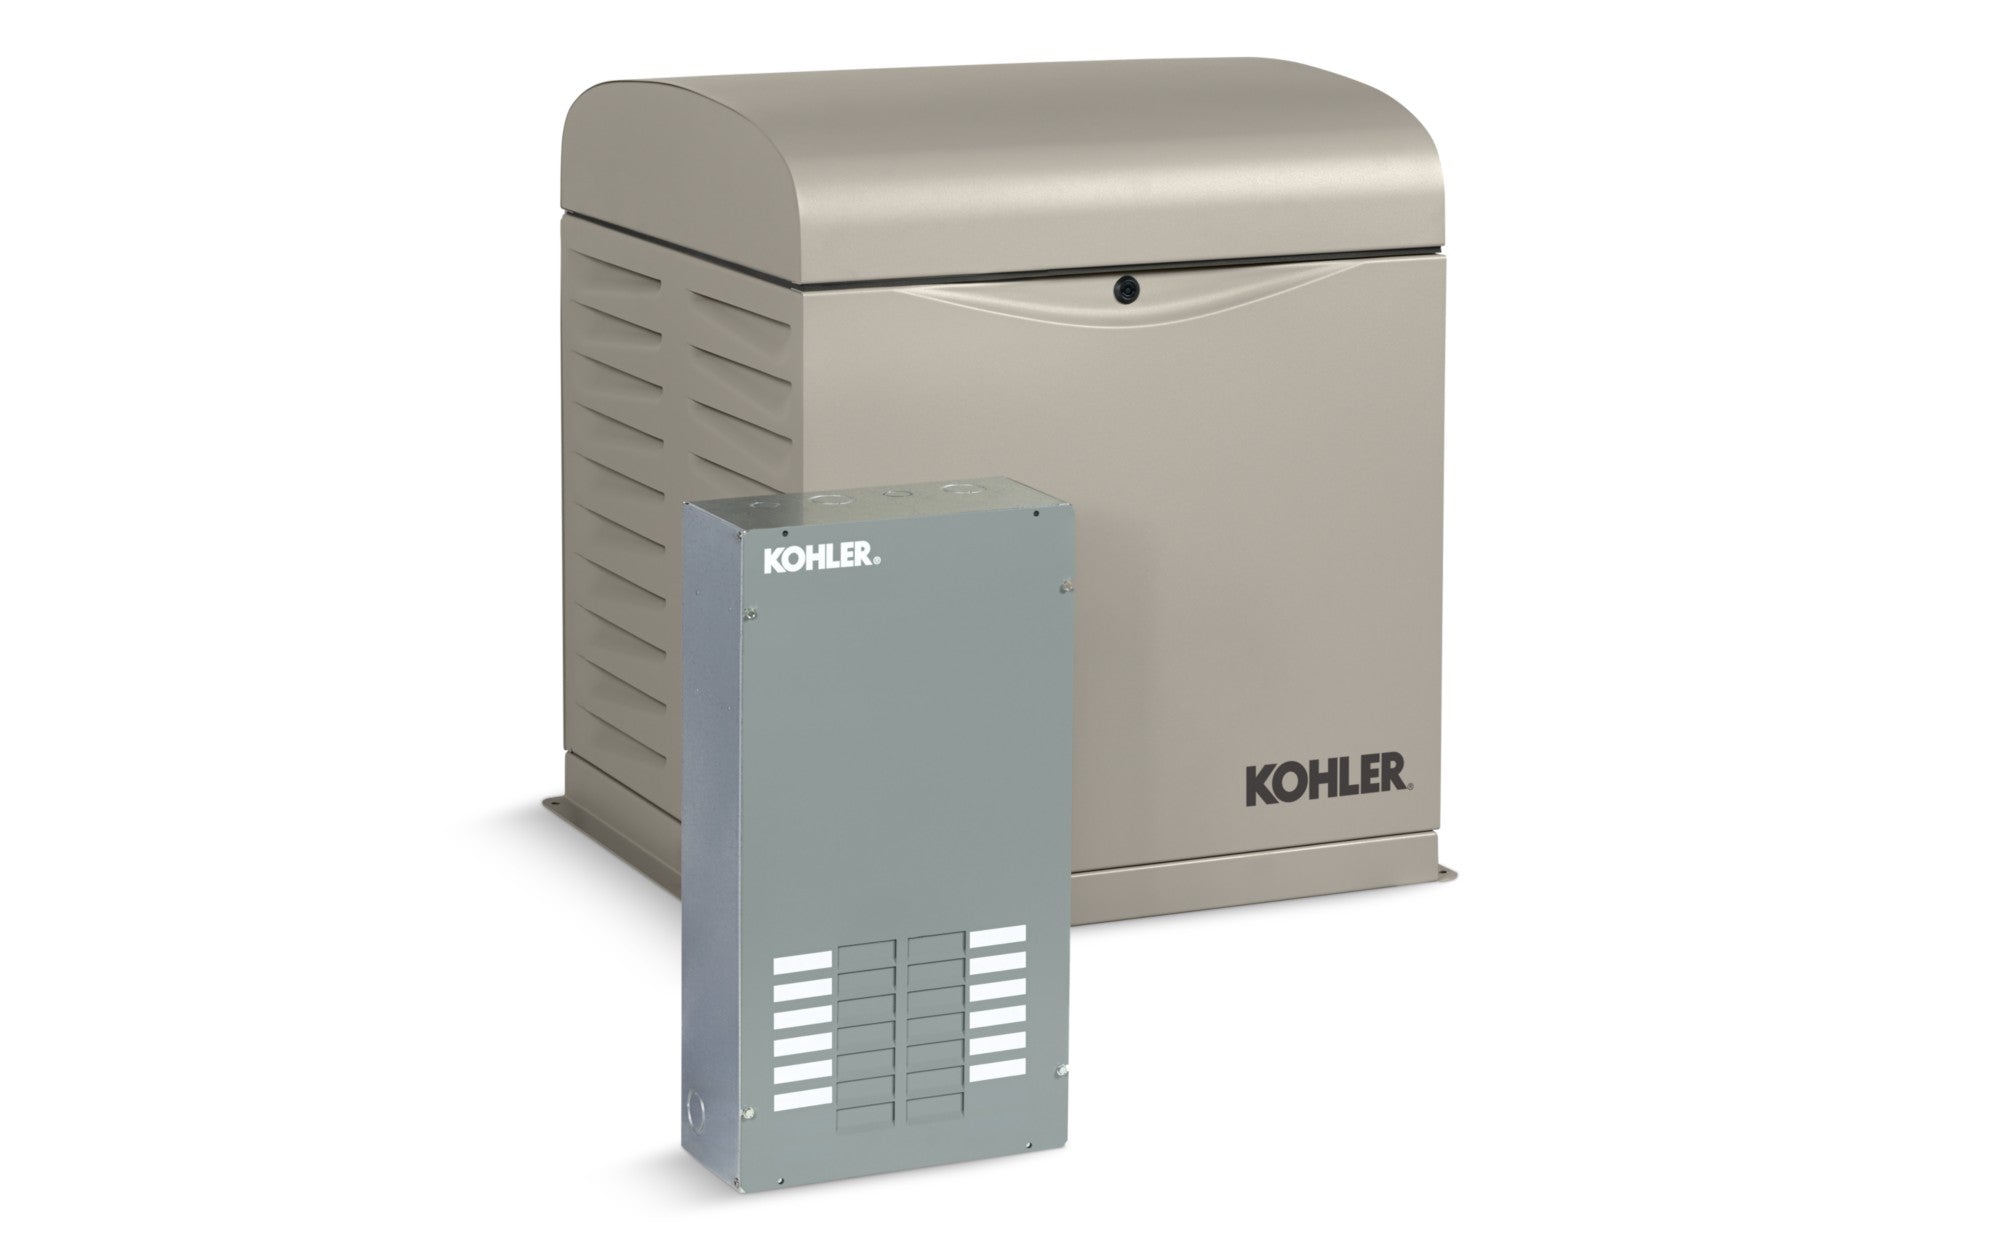 Kohler 12RESVL-100LC12 Air-Cooled Standby Generator with 100 Amp 12-Circuit Transfer Switch Single Phase, 12,000-Watt